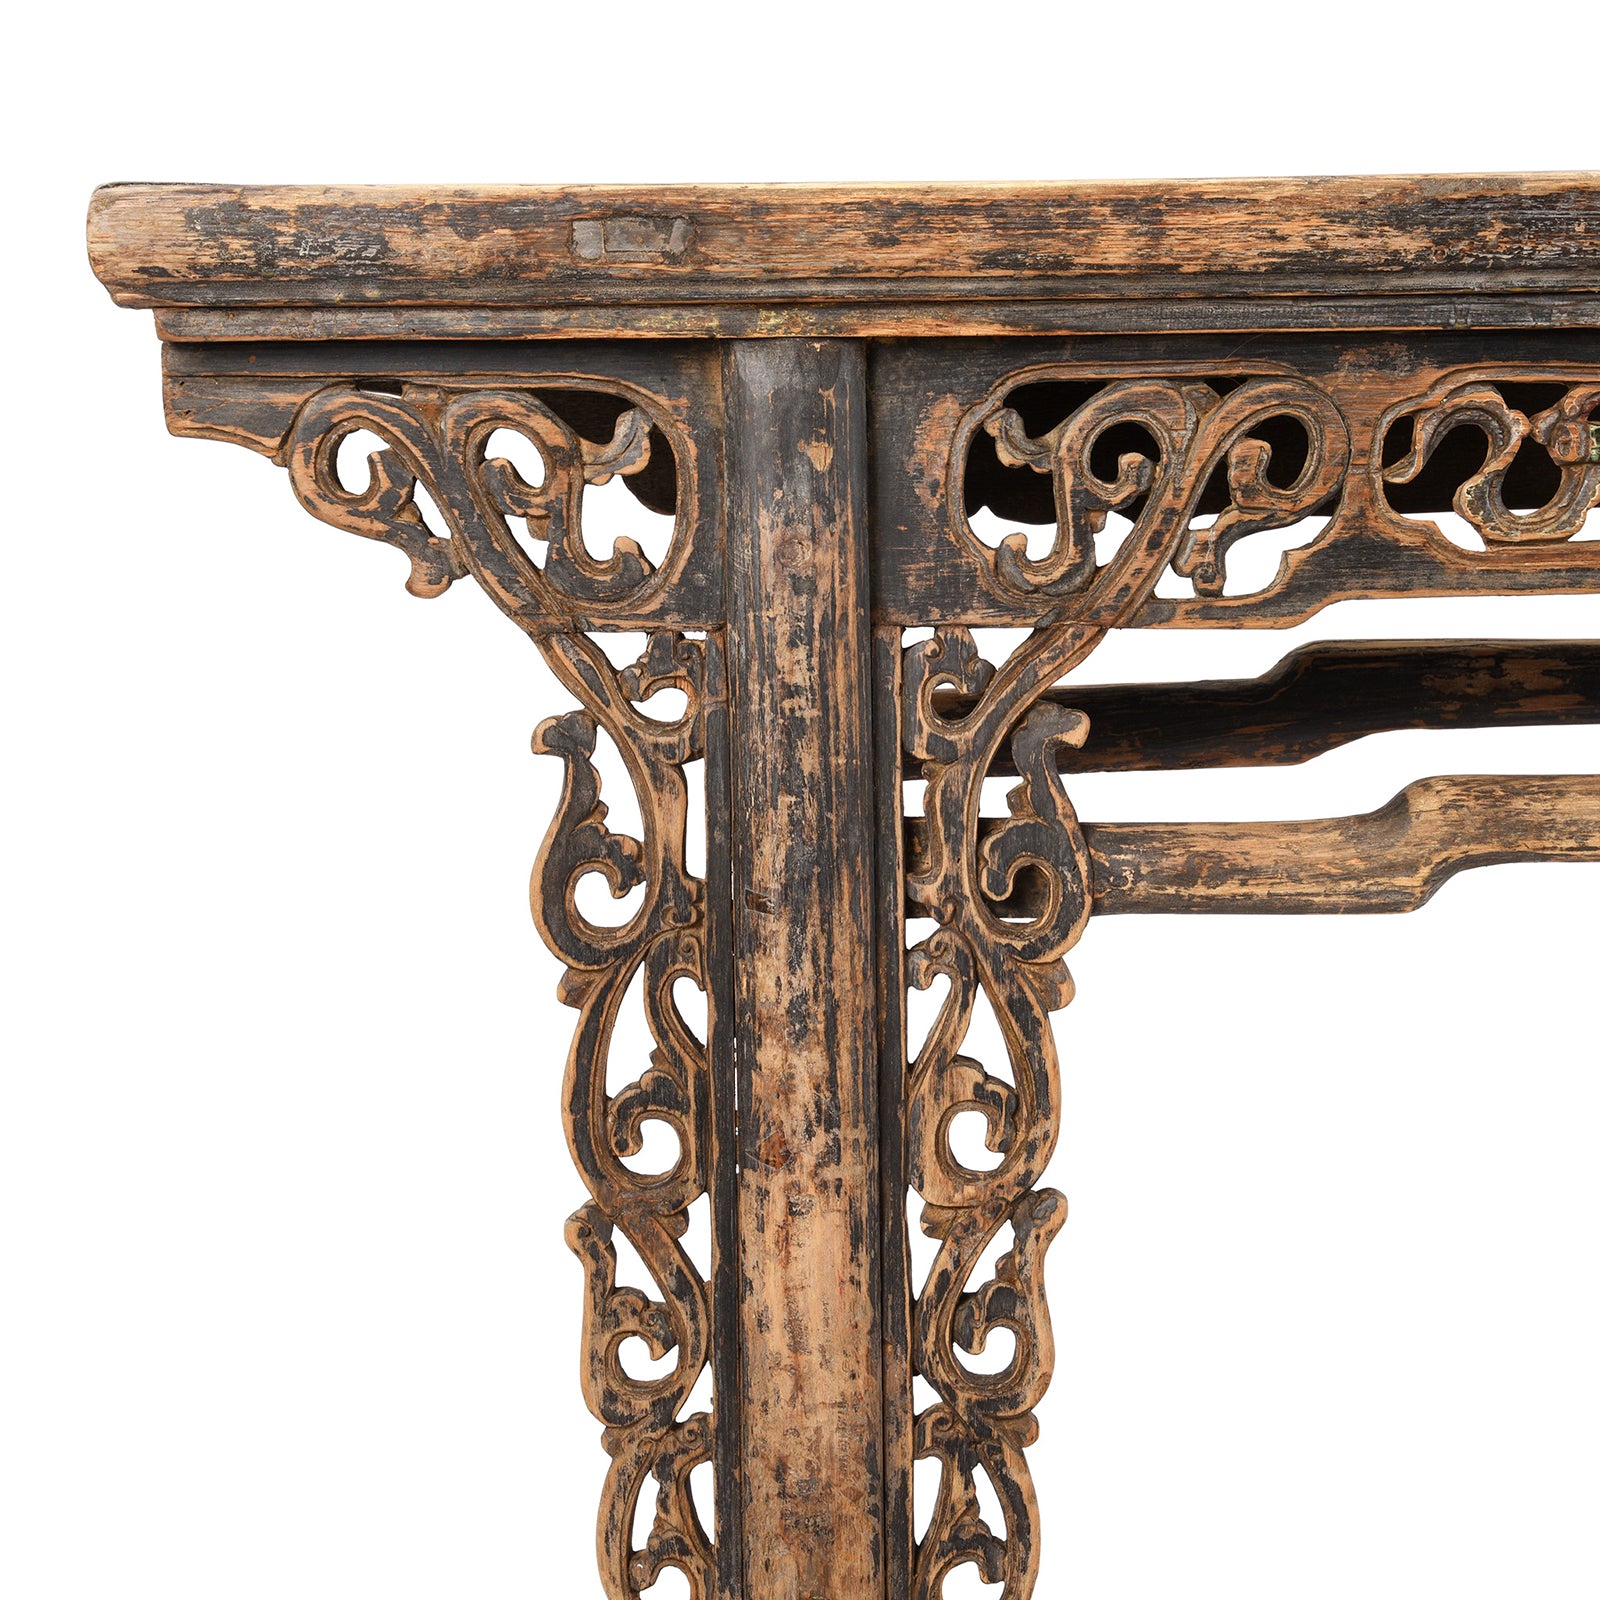 Antique Carved Floral Chinese Altar Table From Qinghai | Indigo Antiques